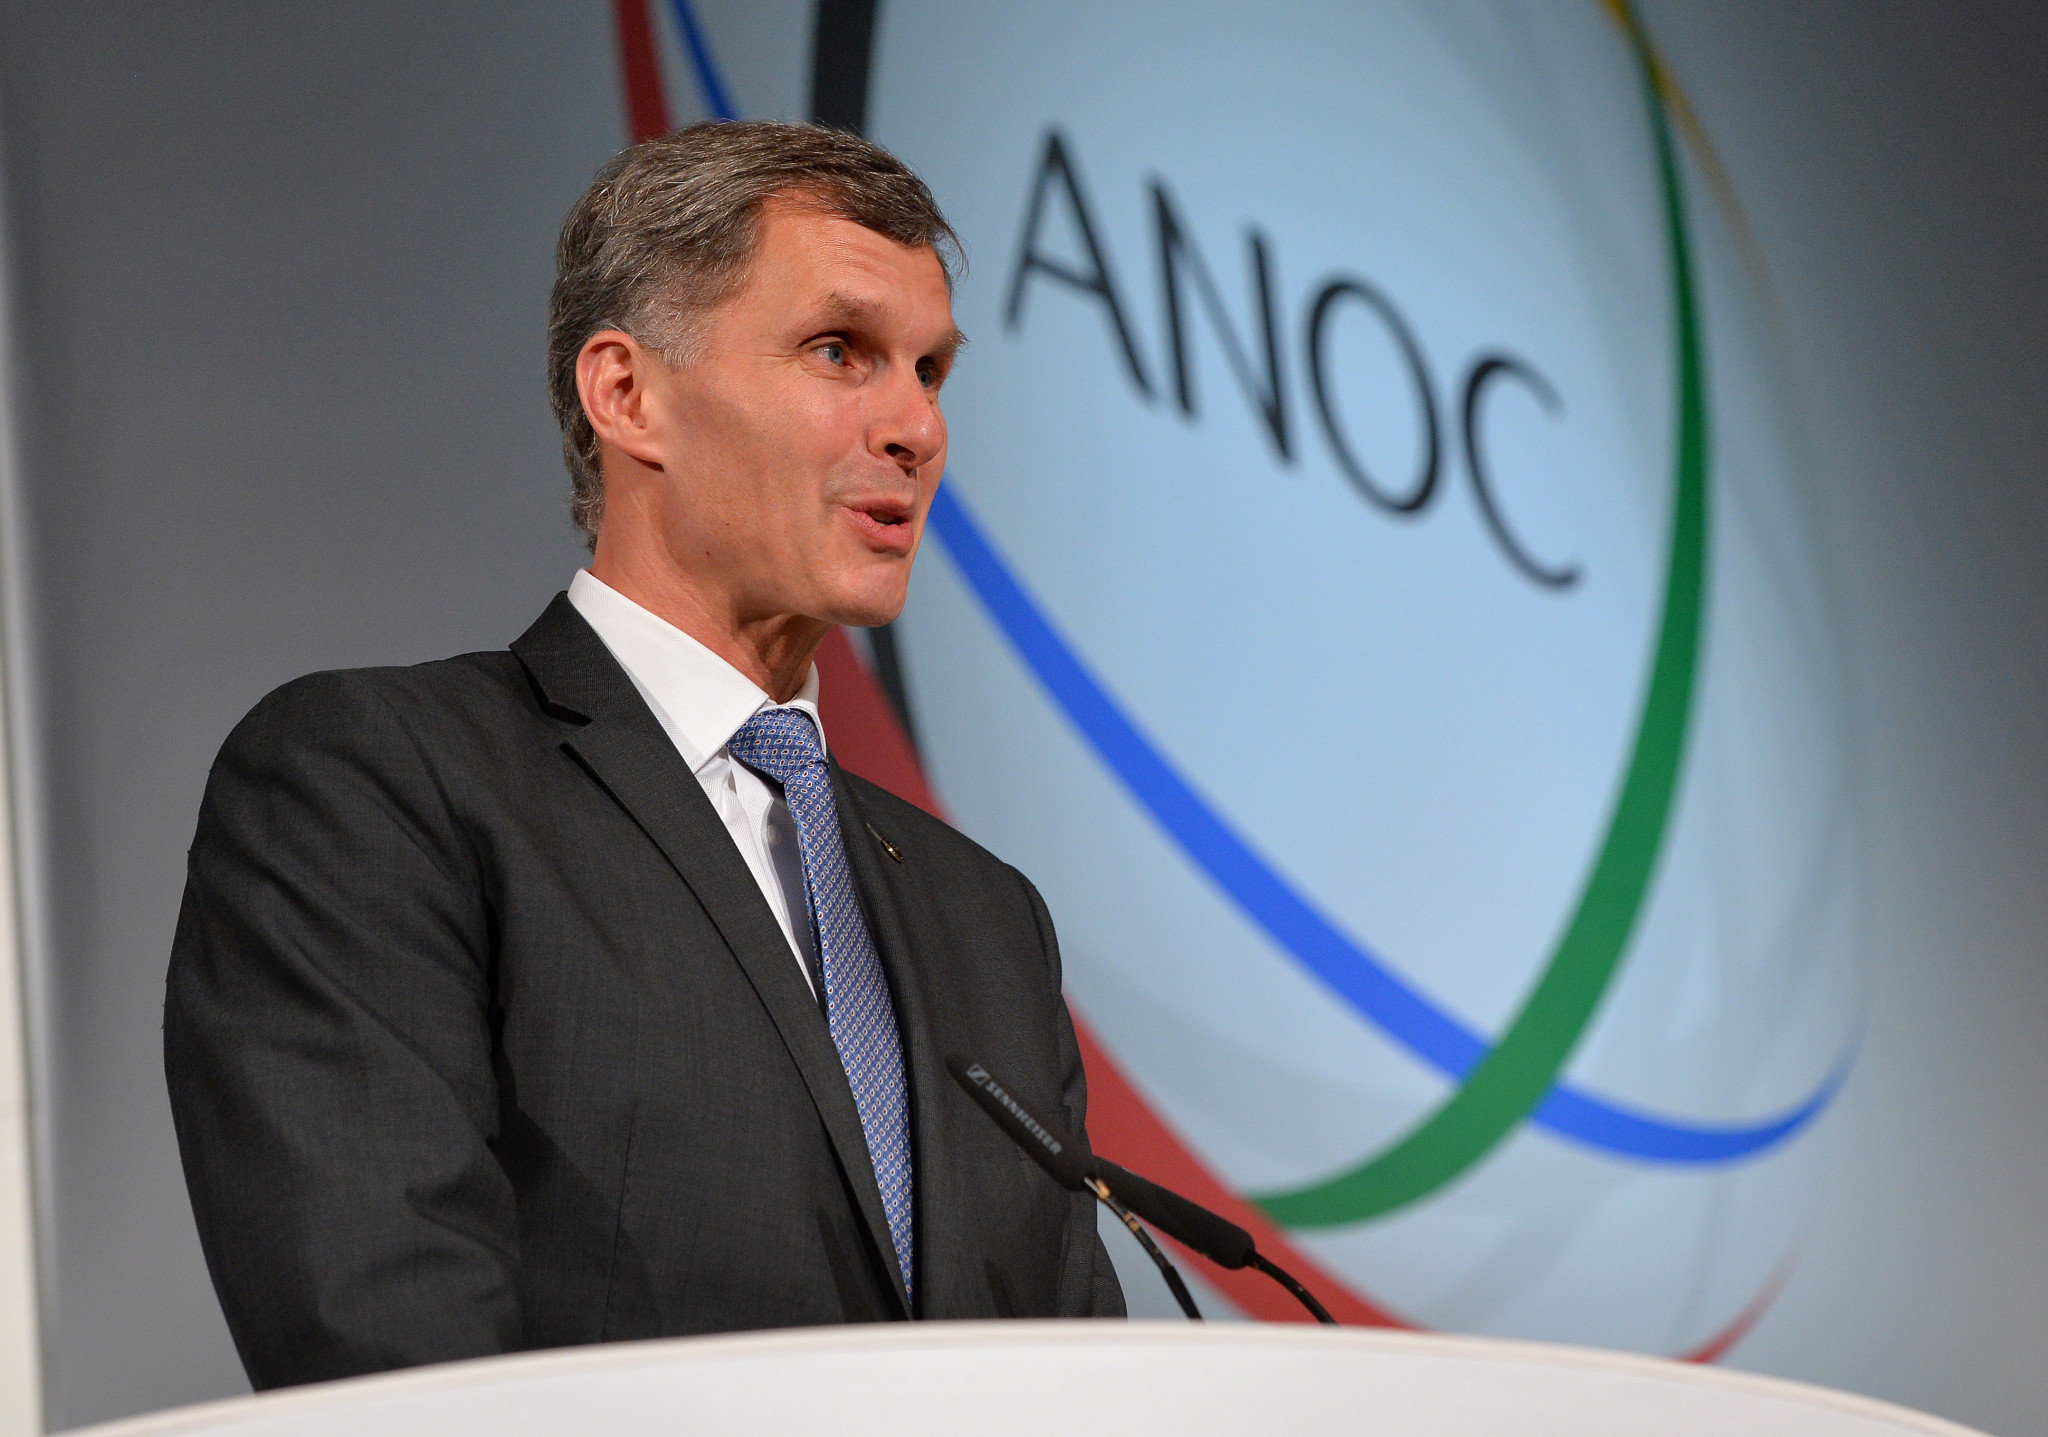 Kejval positive about chances of becoming IOC member despite financial allegations